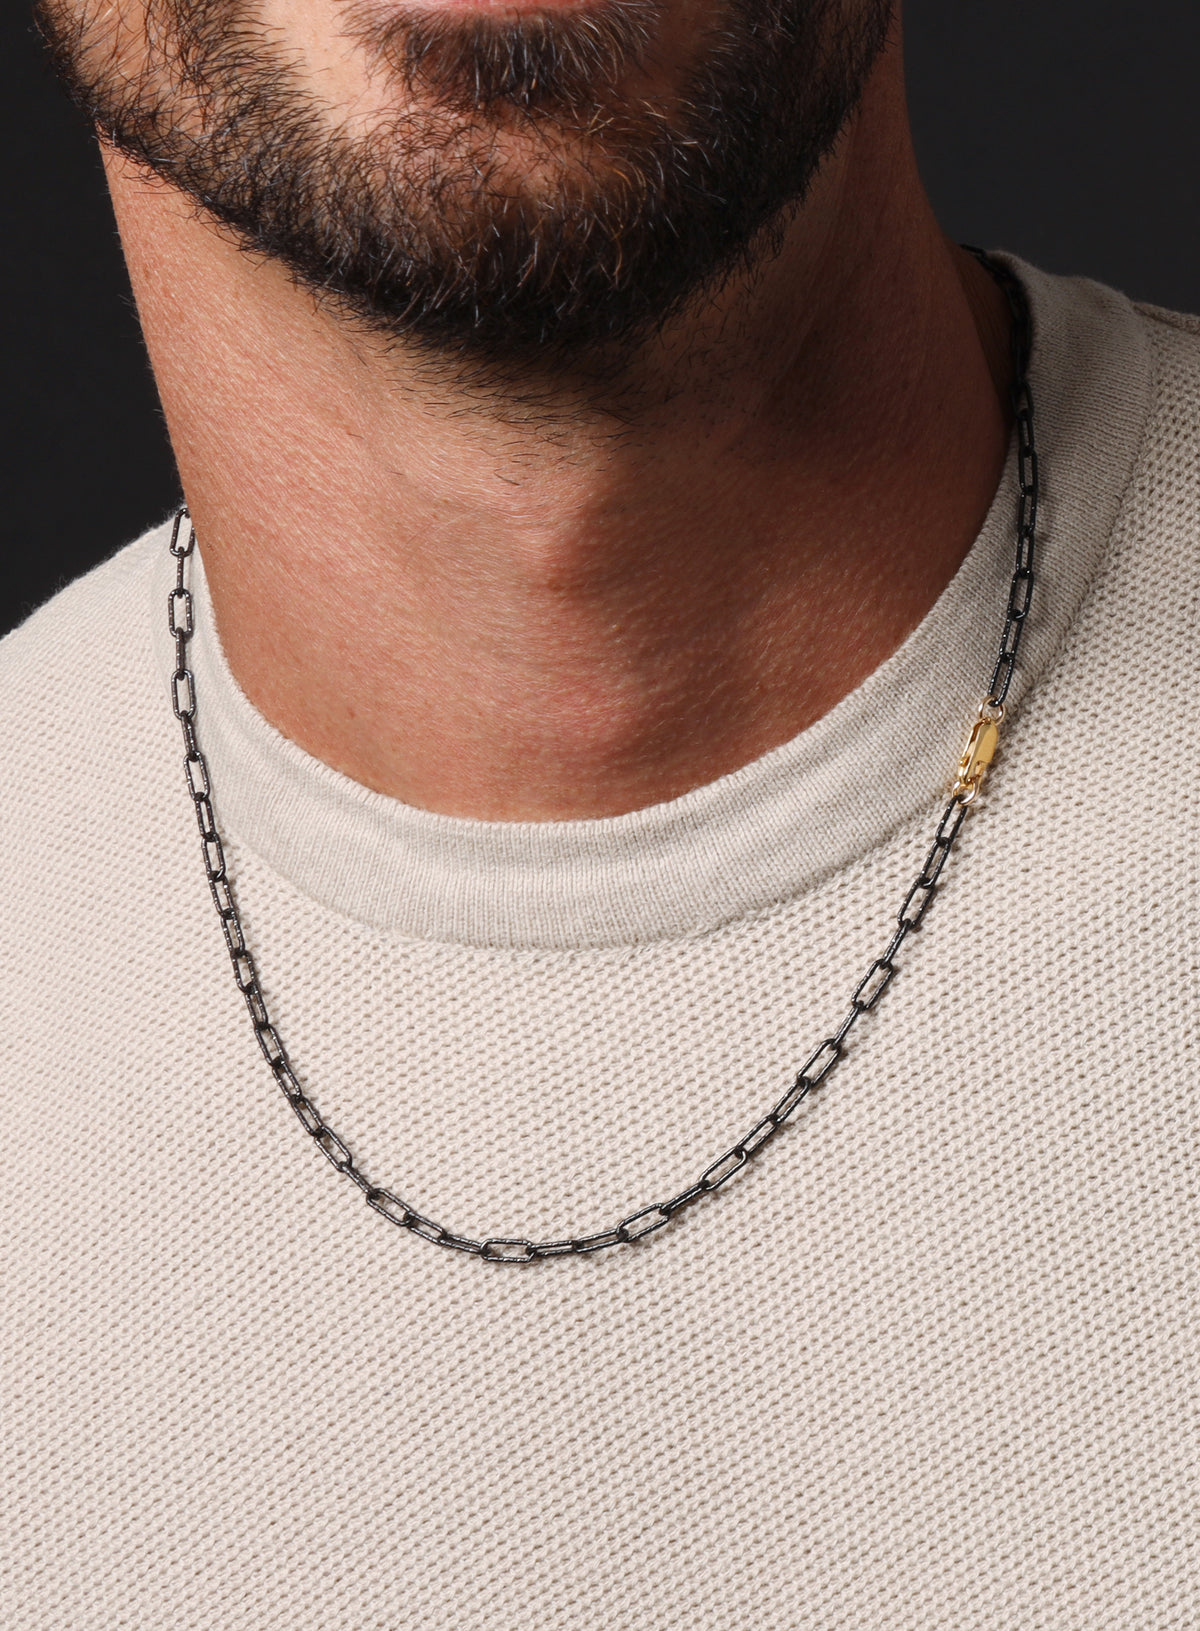 Mens Titanium Curb Chain Necklace | LOVE2HAVE in the UK!